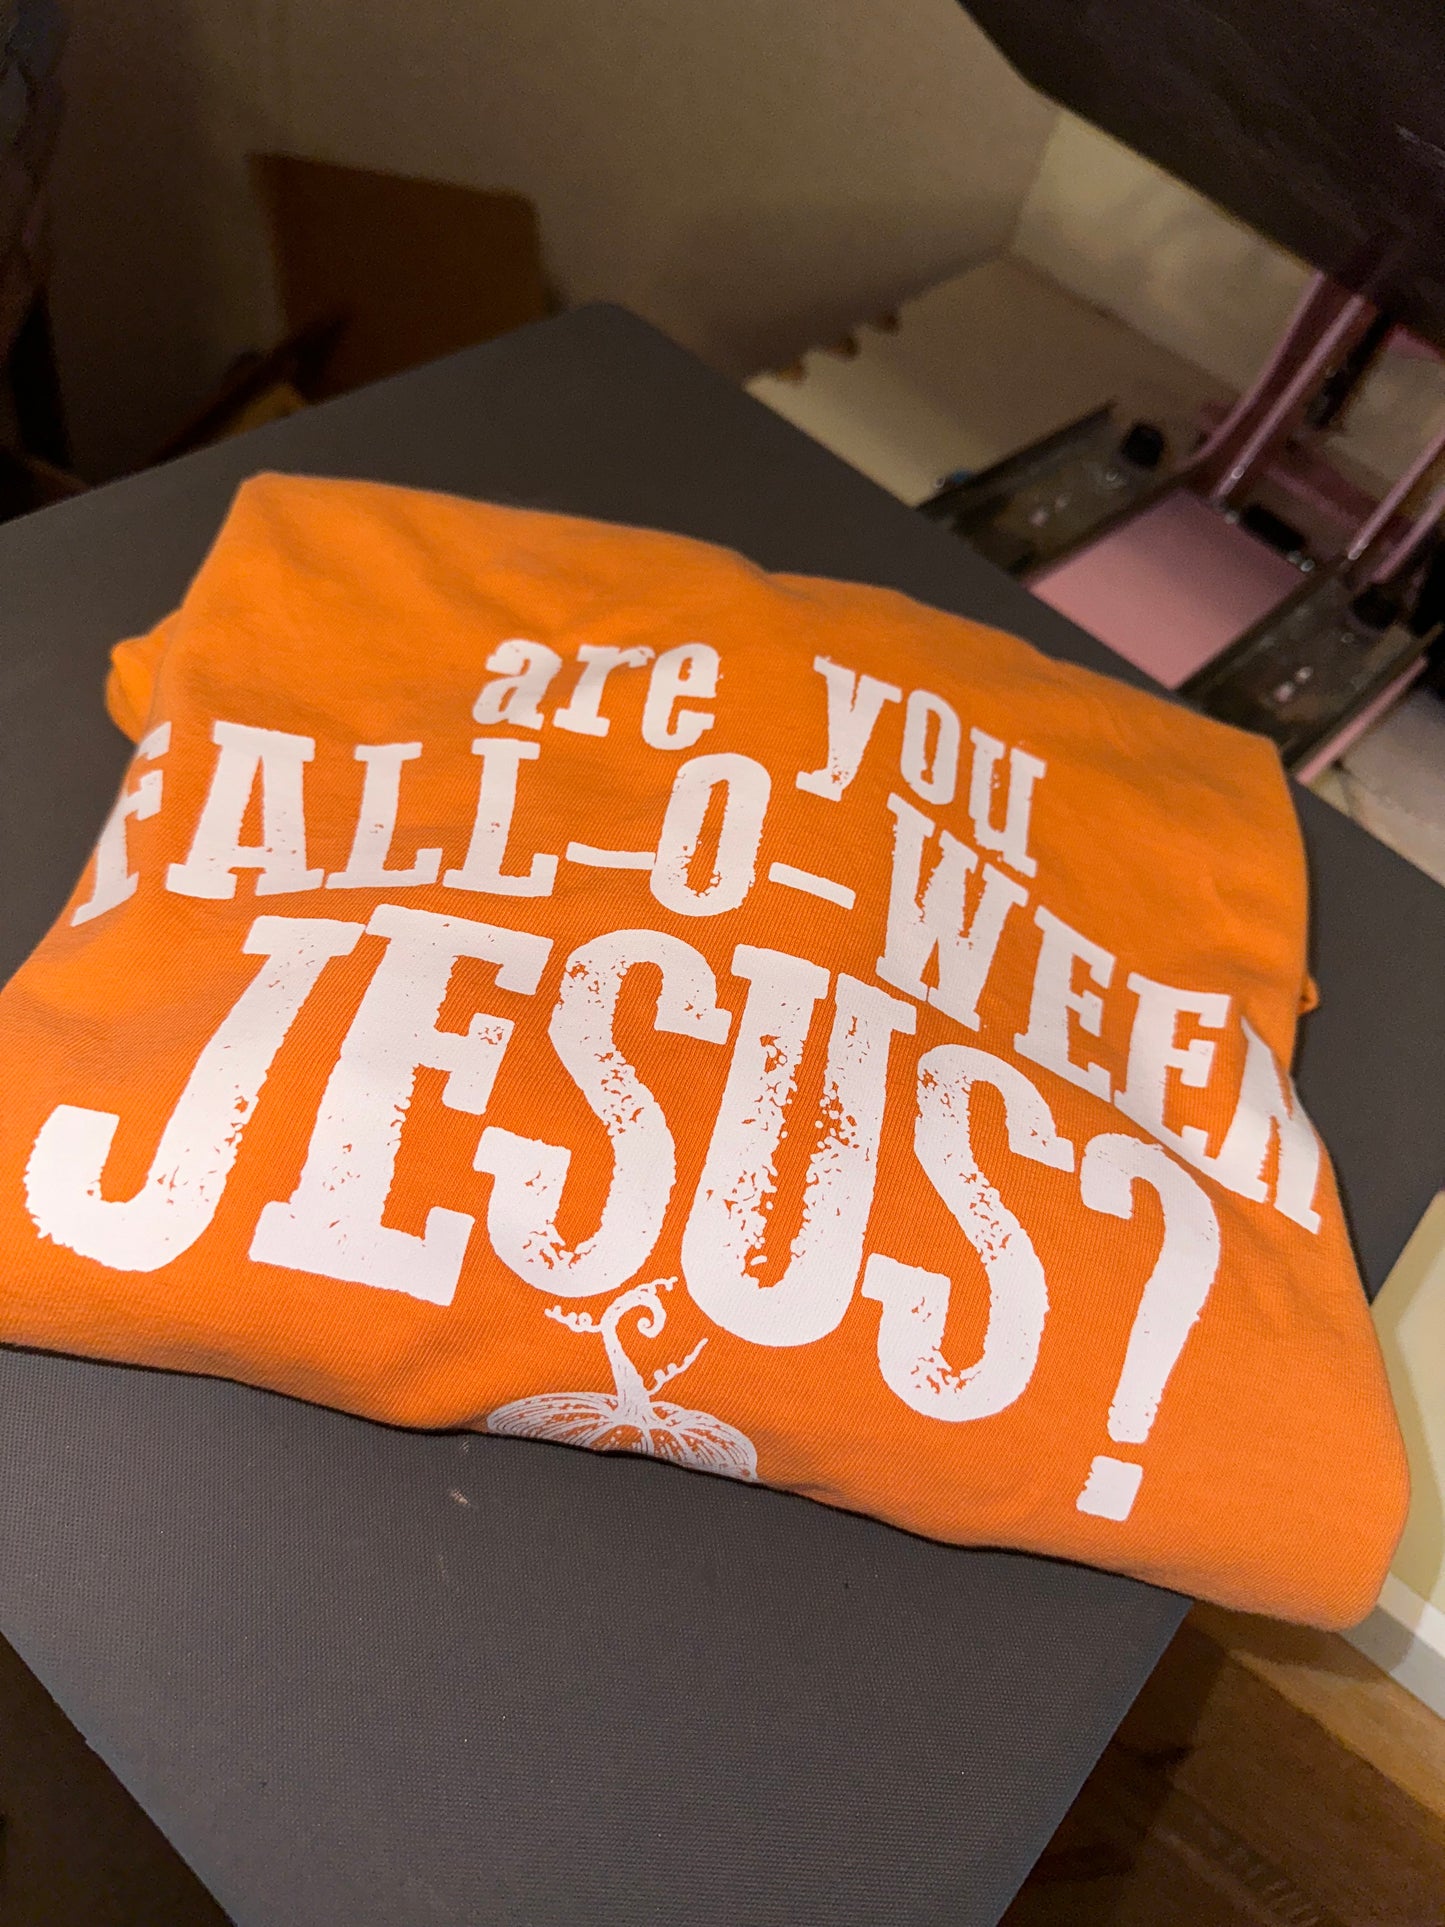 Are You Fall-O-Ween Jesus?